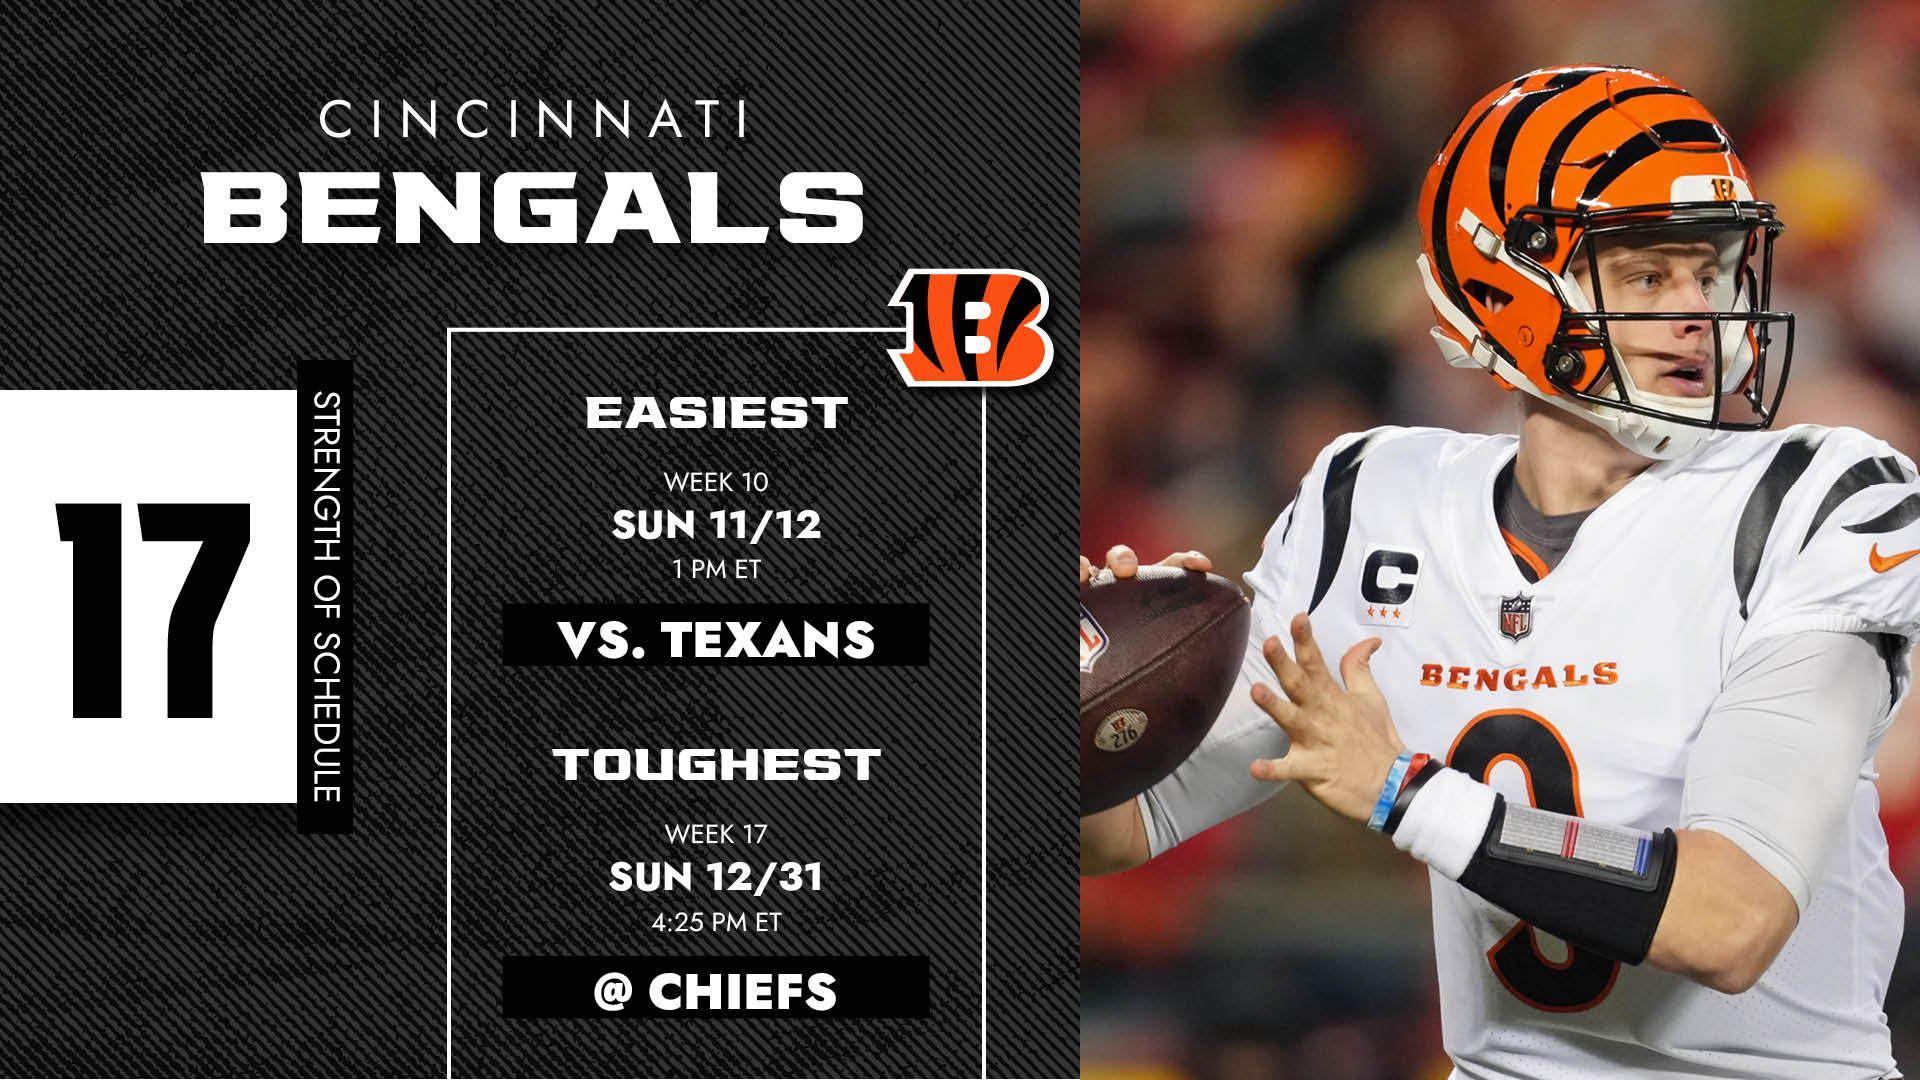 do the bengals play this sunday